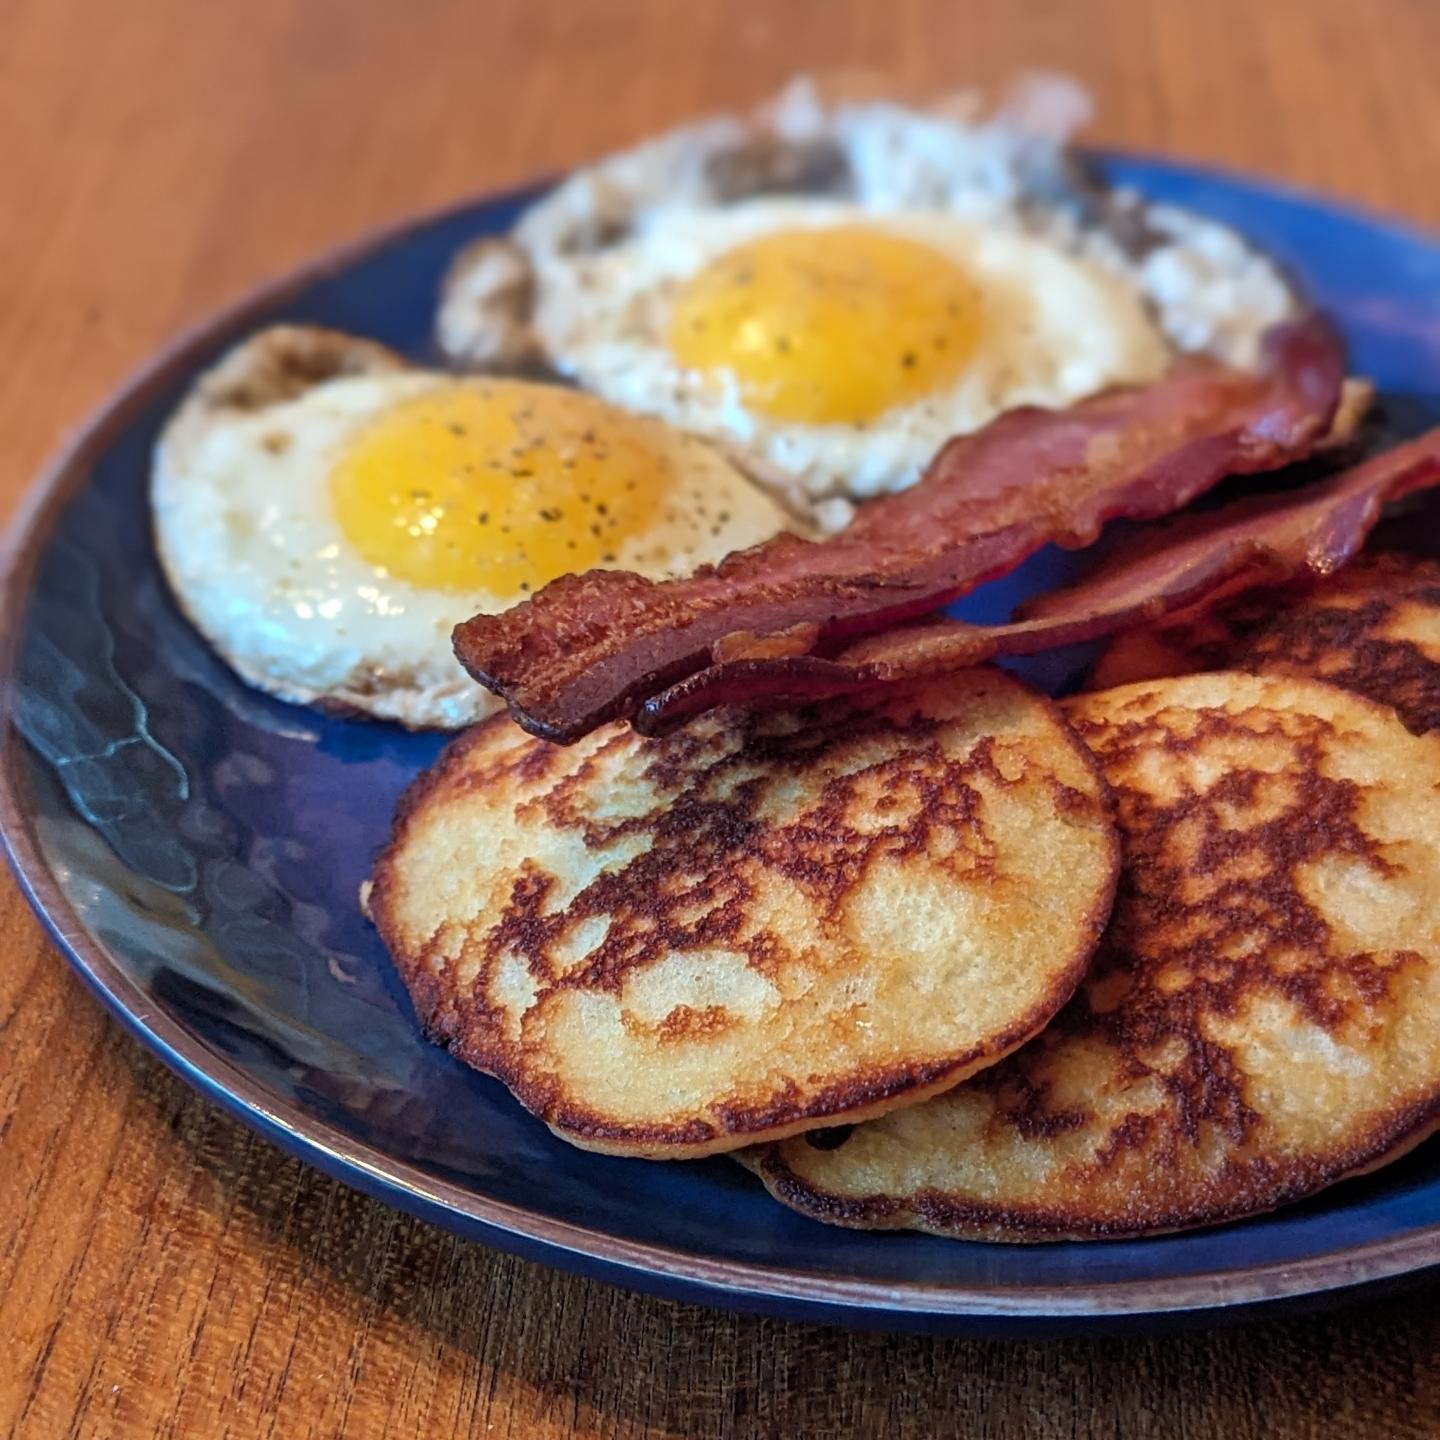 Classic breakfast Two eggs, two strips of bacon and pancakes These @birchbenders pancakes absolutely hit the spot. These are the keto ones, cooked in butter medium heat and were just perfection. Paired with crispy bacon and the eggs were perfectly runny for dipping the pancakes into. #classicbreakfast #pancakebreakfast #weekendvibes #brunchgoals